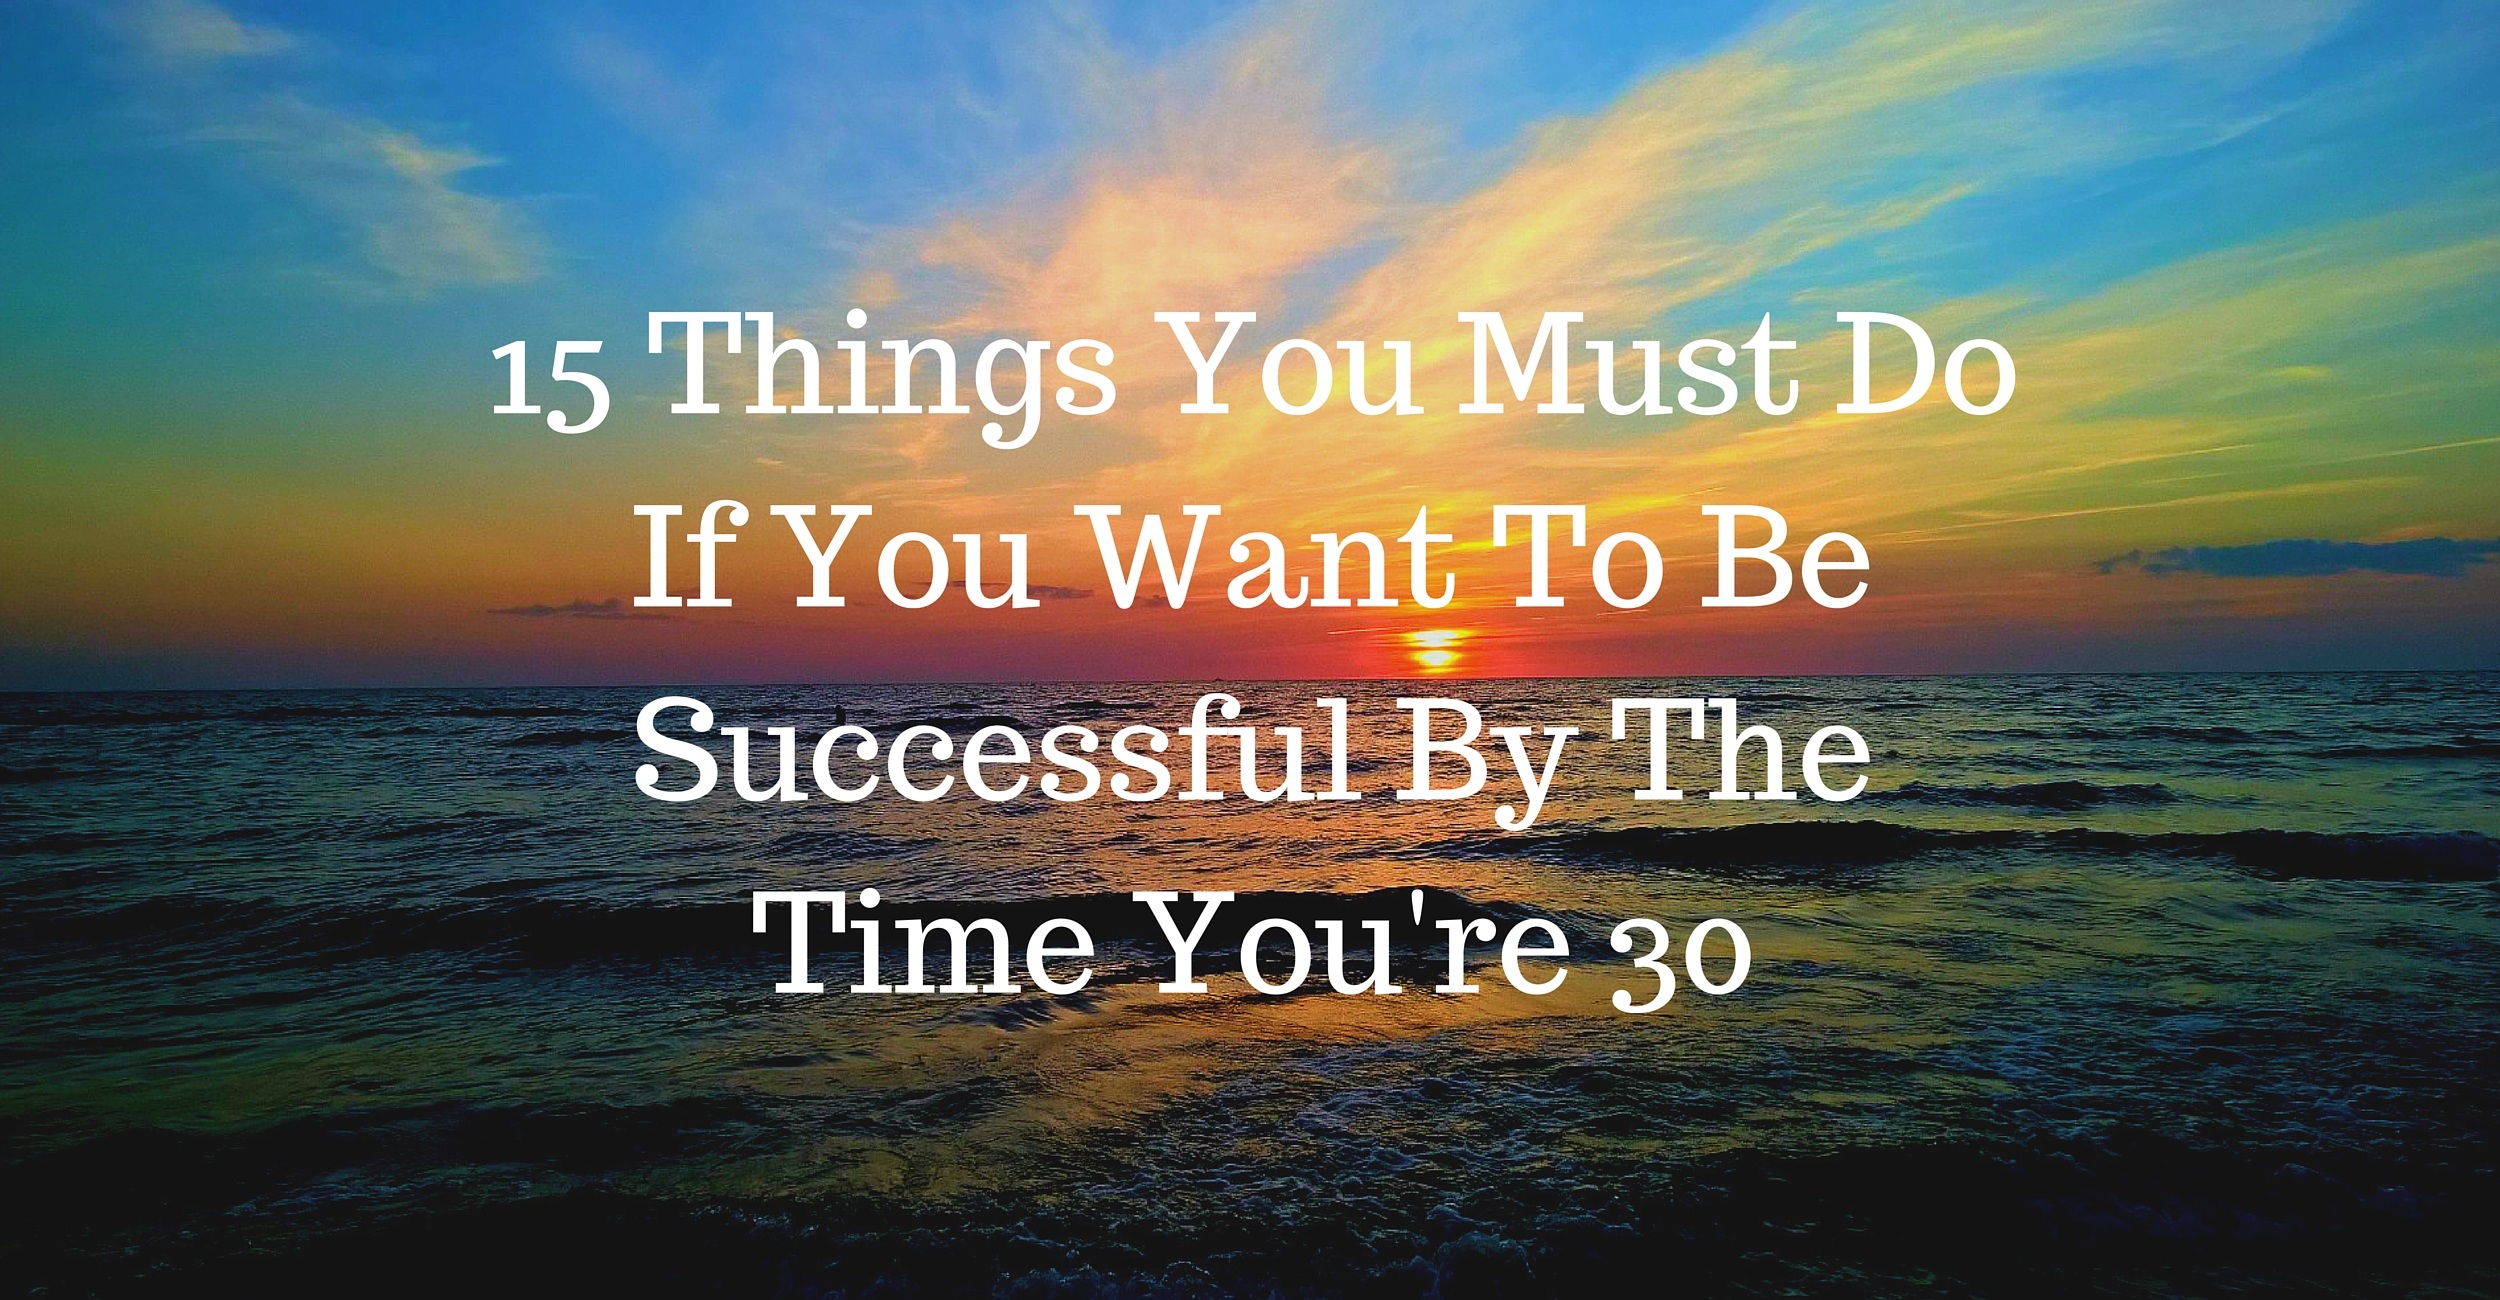 15 Things You Must Do If You Want To Be Successful By The Time You&#8217;re 30